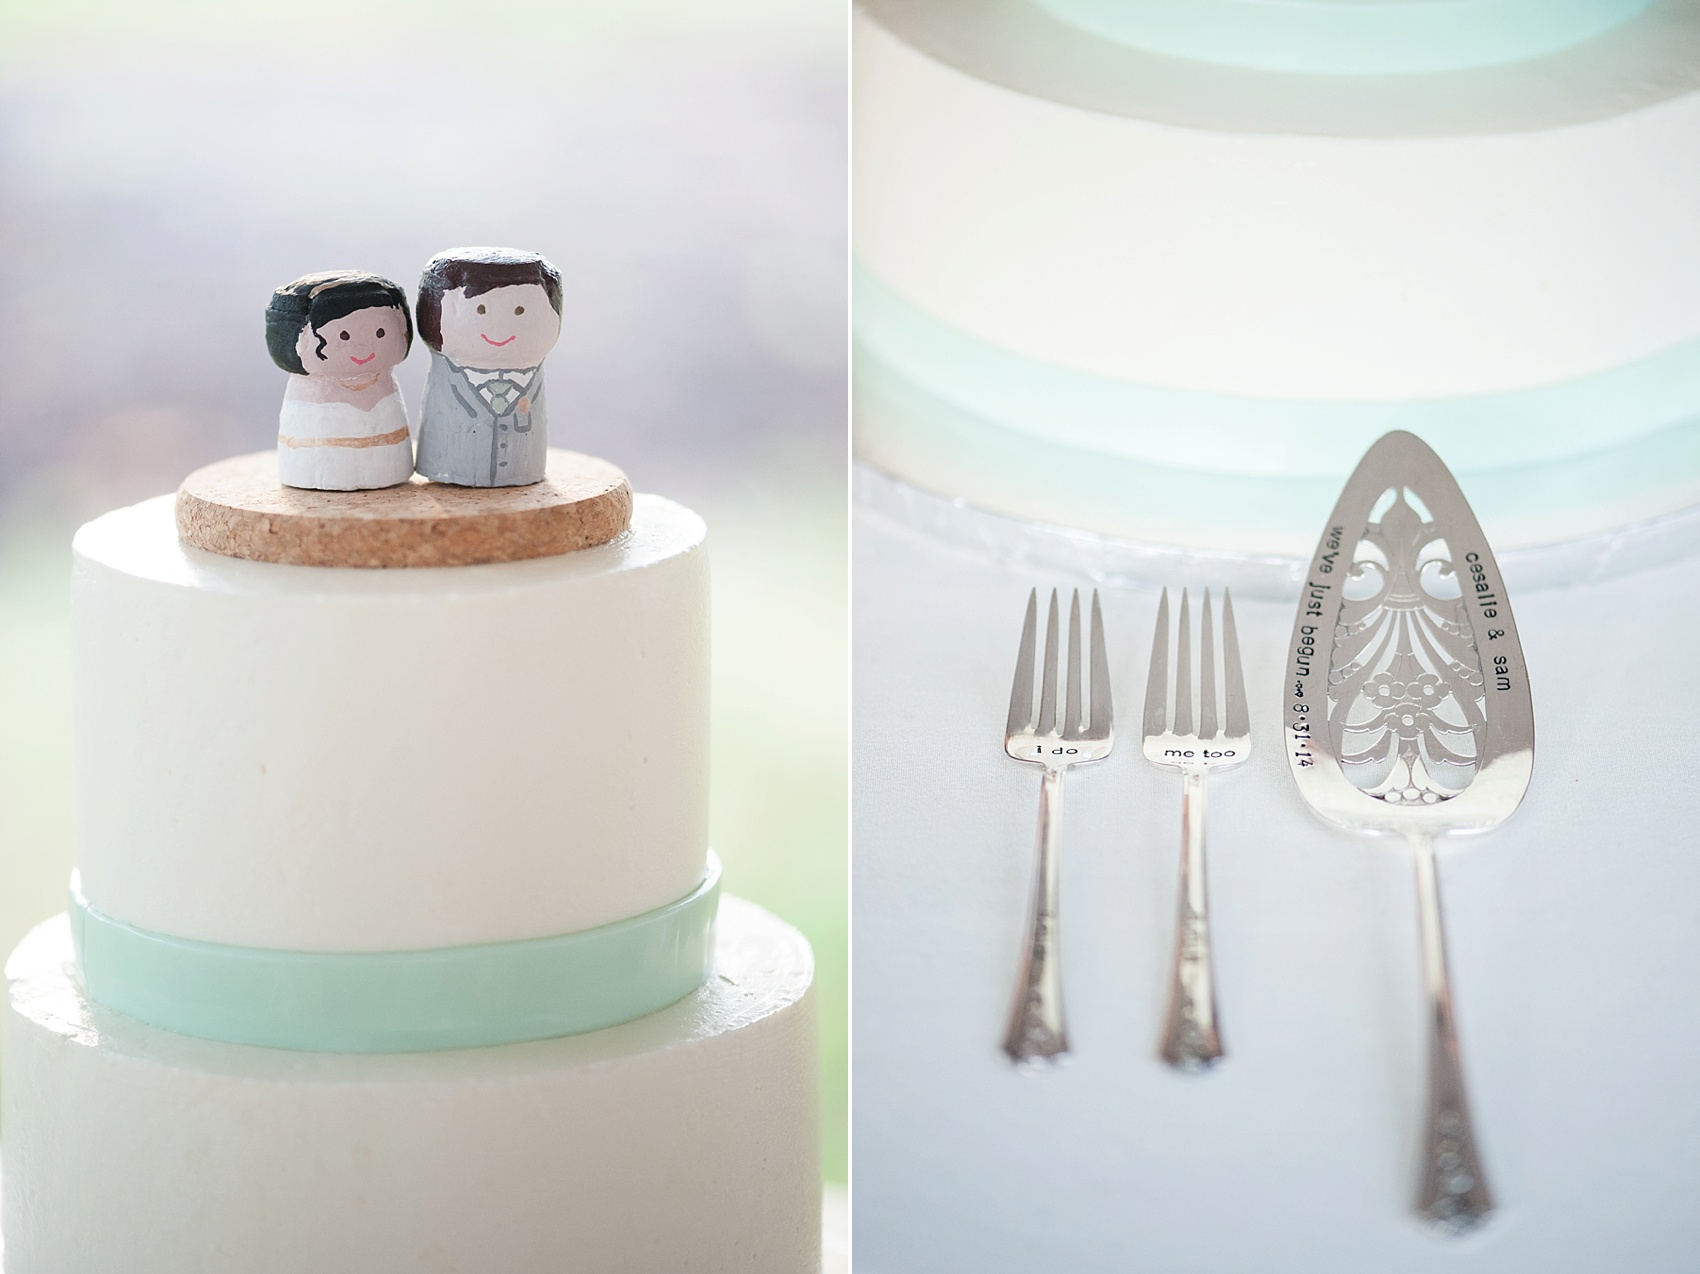 Hopewell Valley Vineyards wedding champagne cork cake topper and custom forks and cake cutter. Photos by New Jersey wedding photographer, Mikkel Paige Photography.